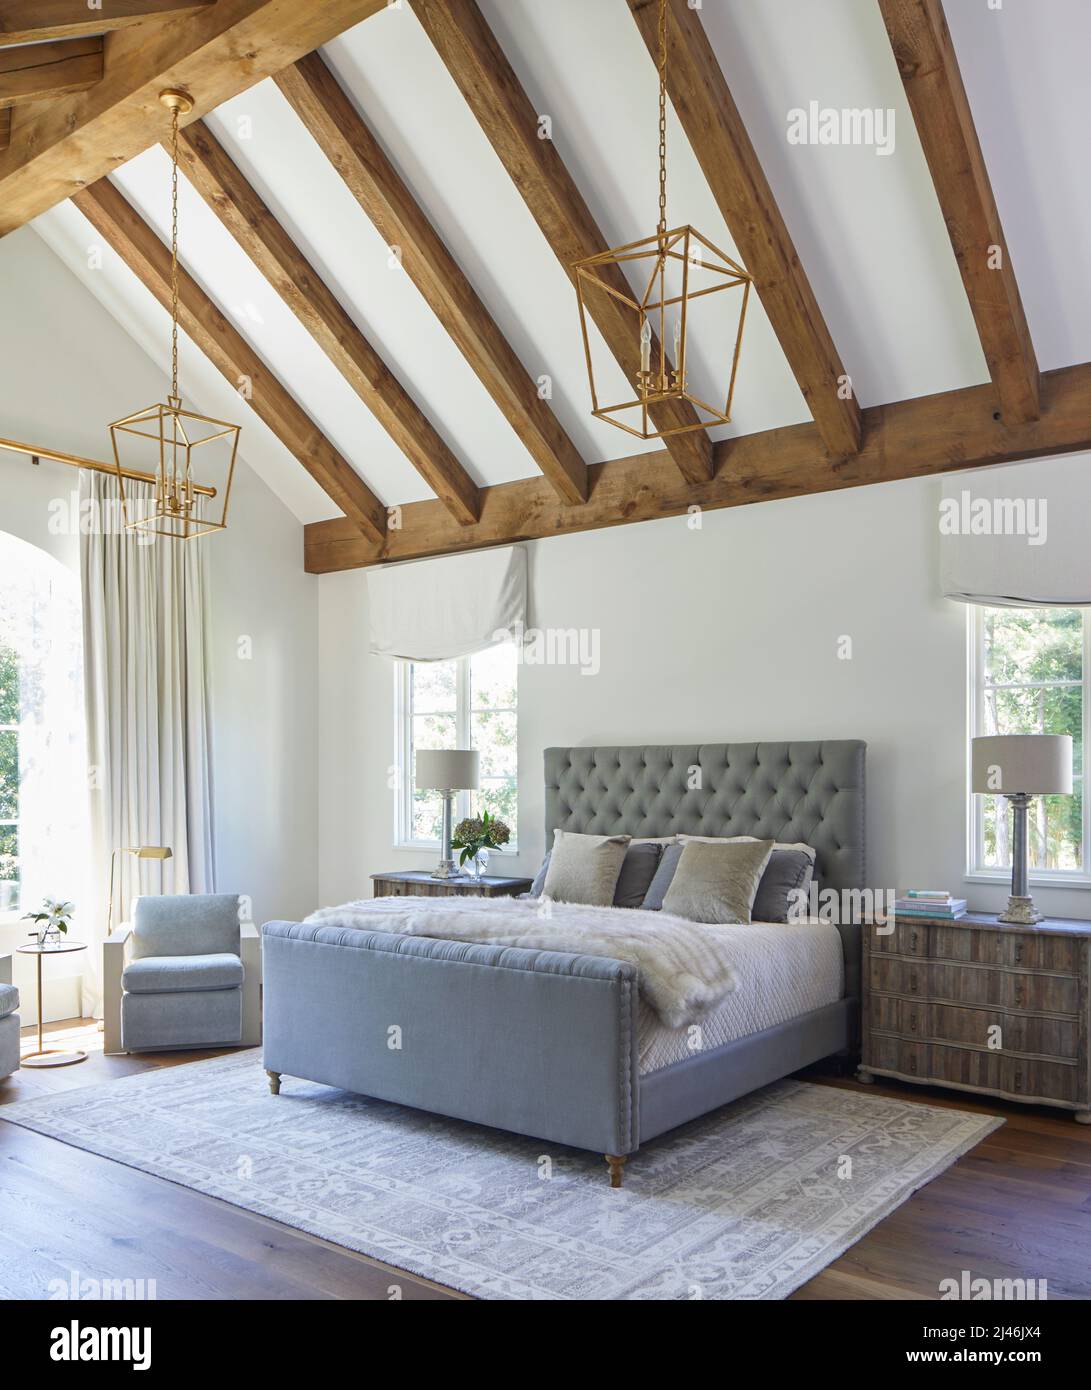 Bedroom with vaulted wood beam ceiling Stock Photo